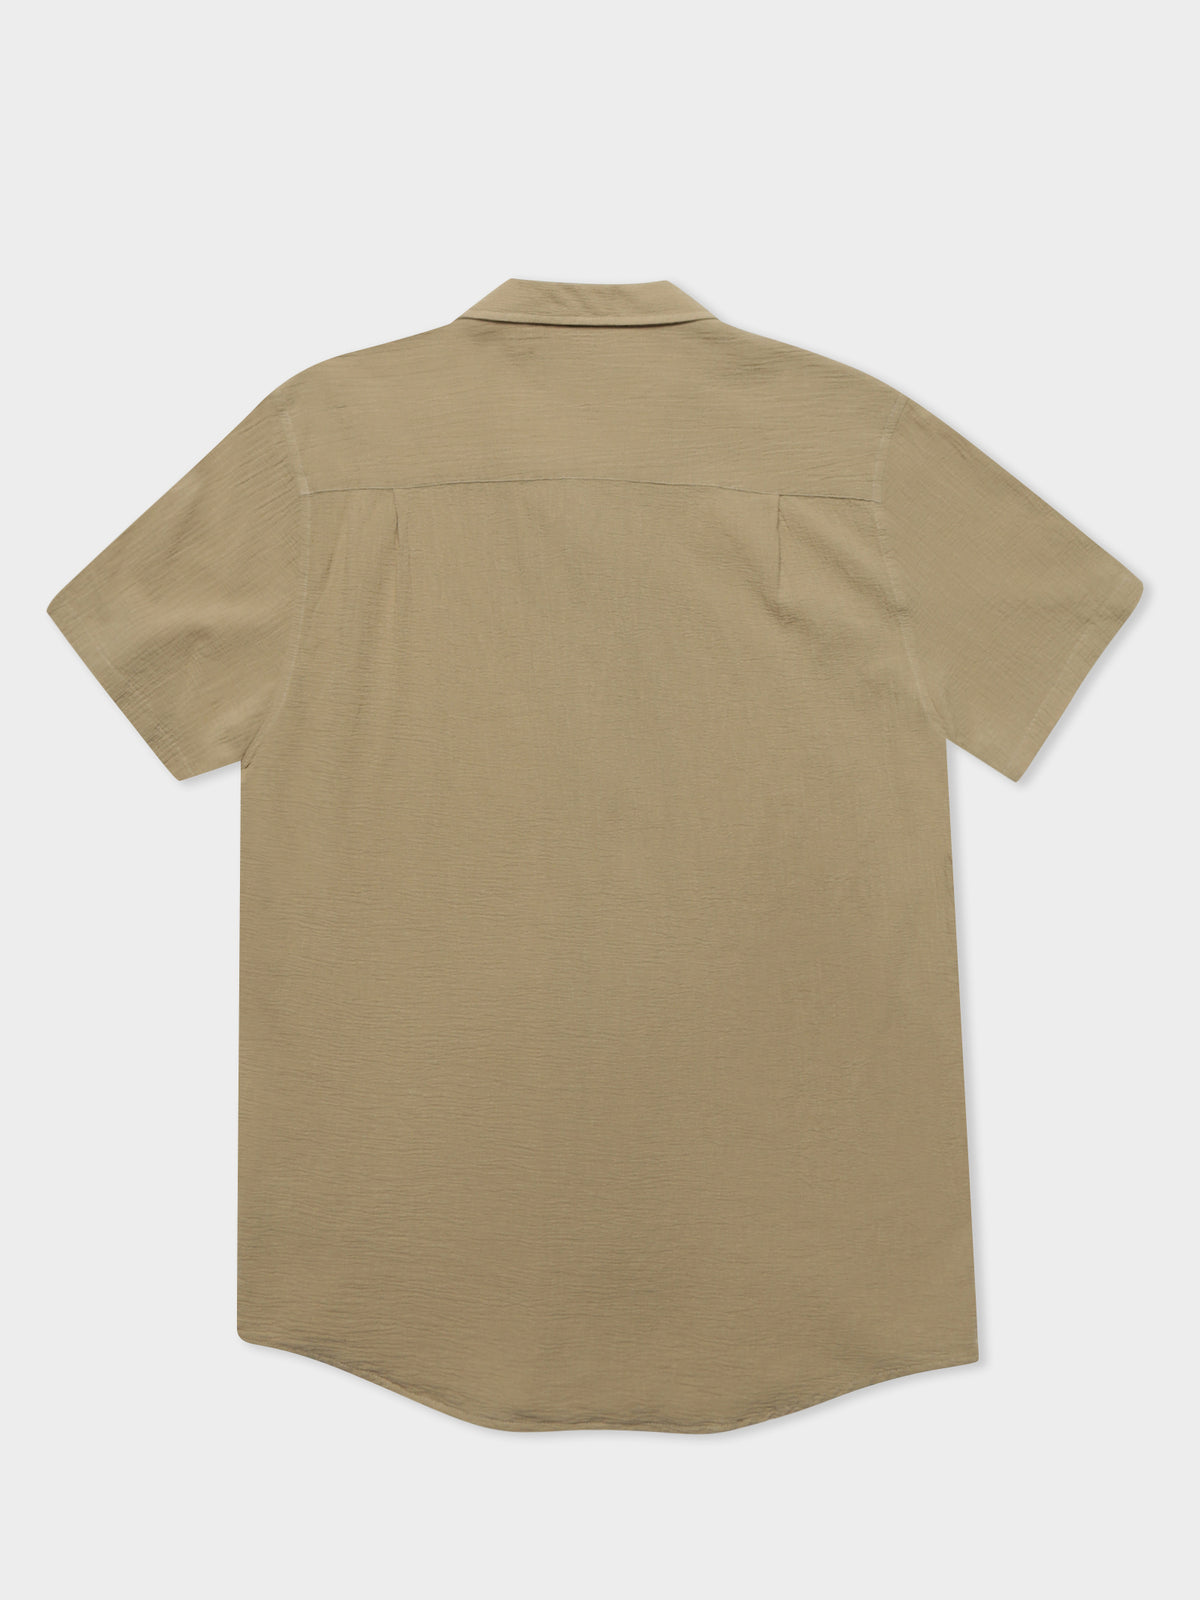 Bedford Shirt in Stone